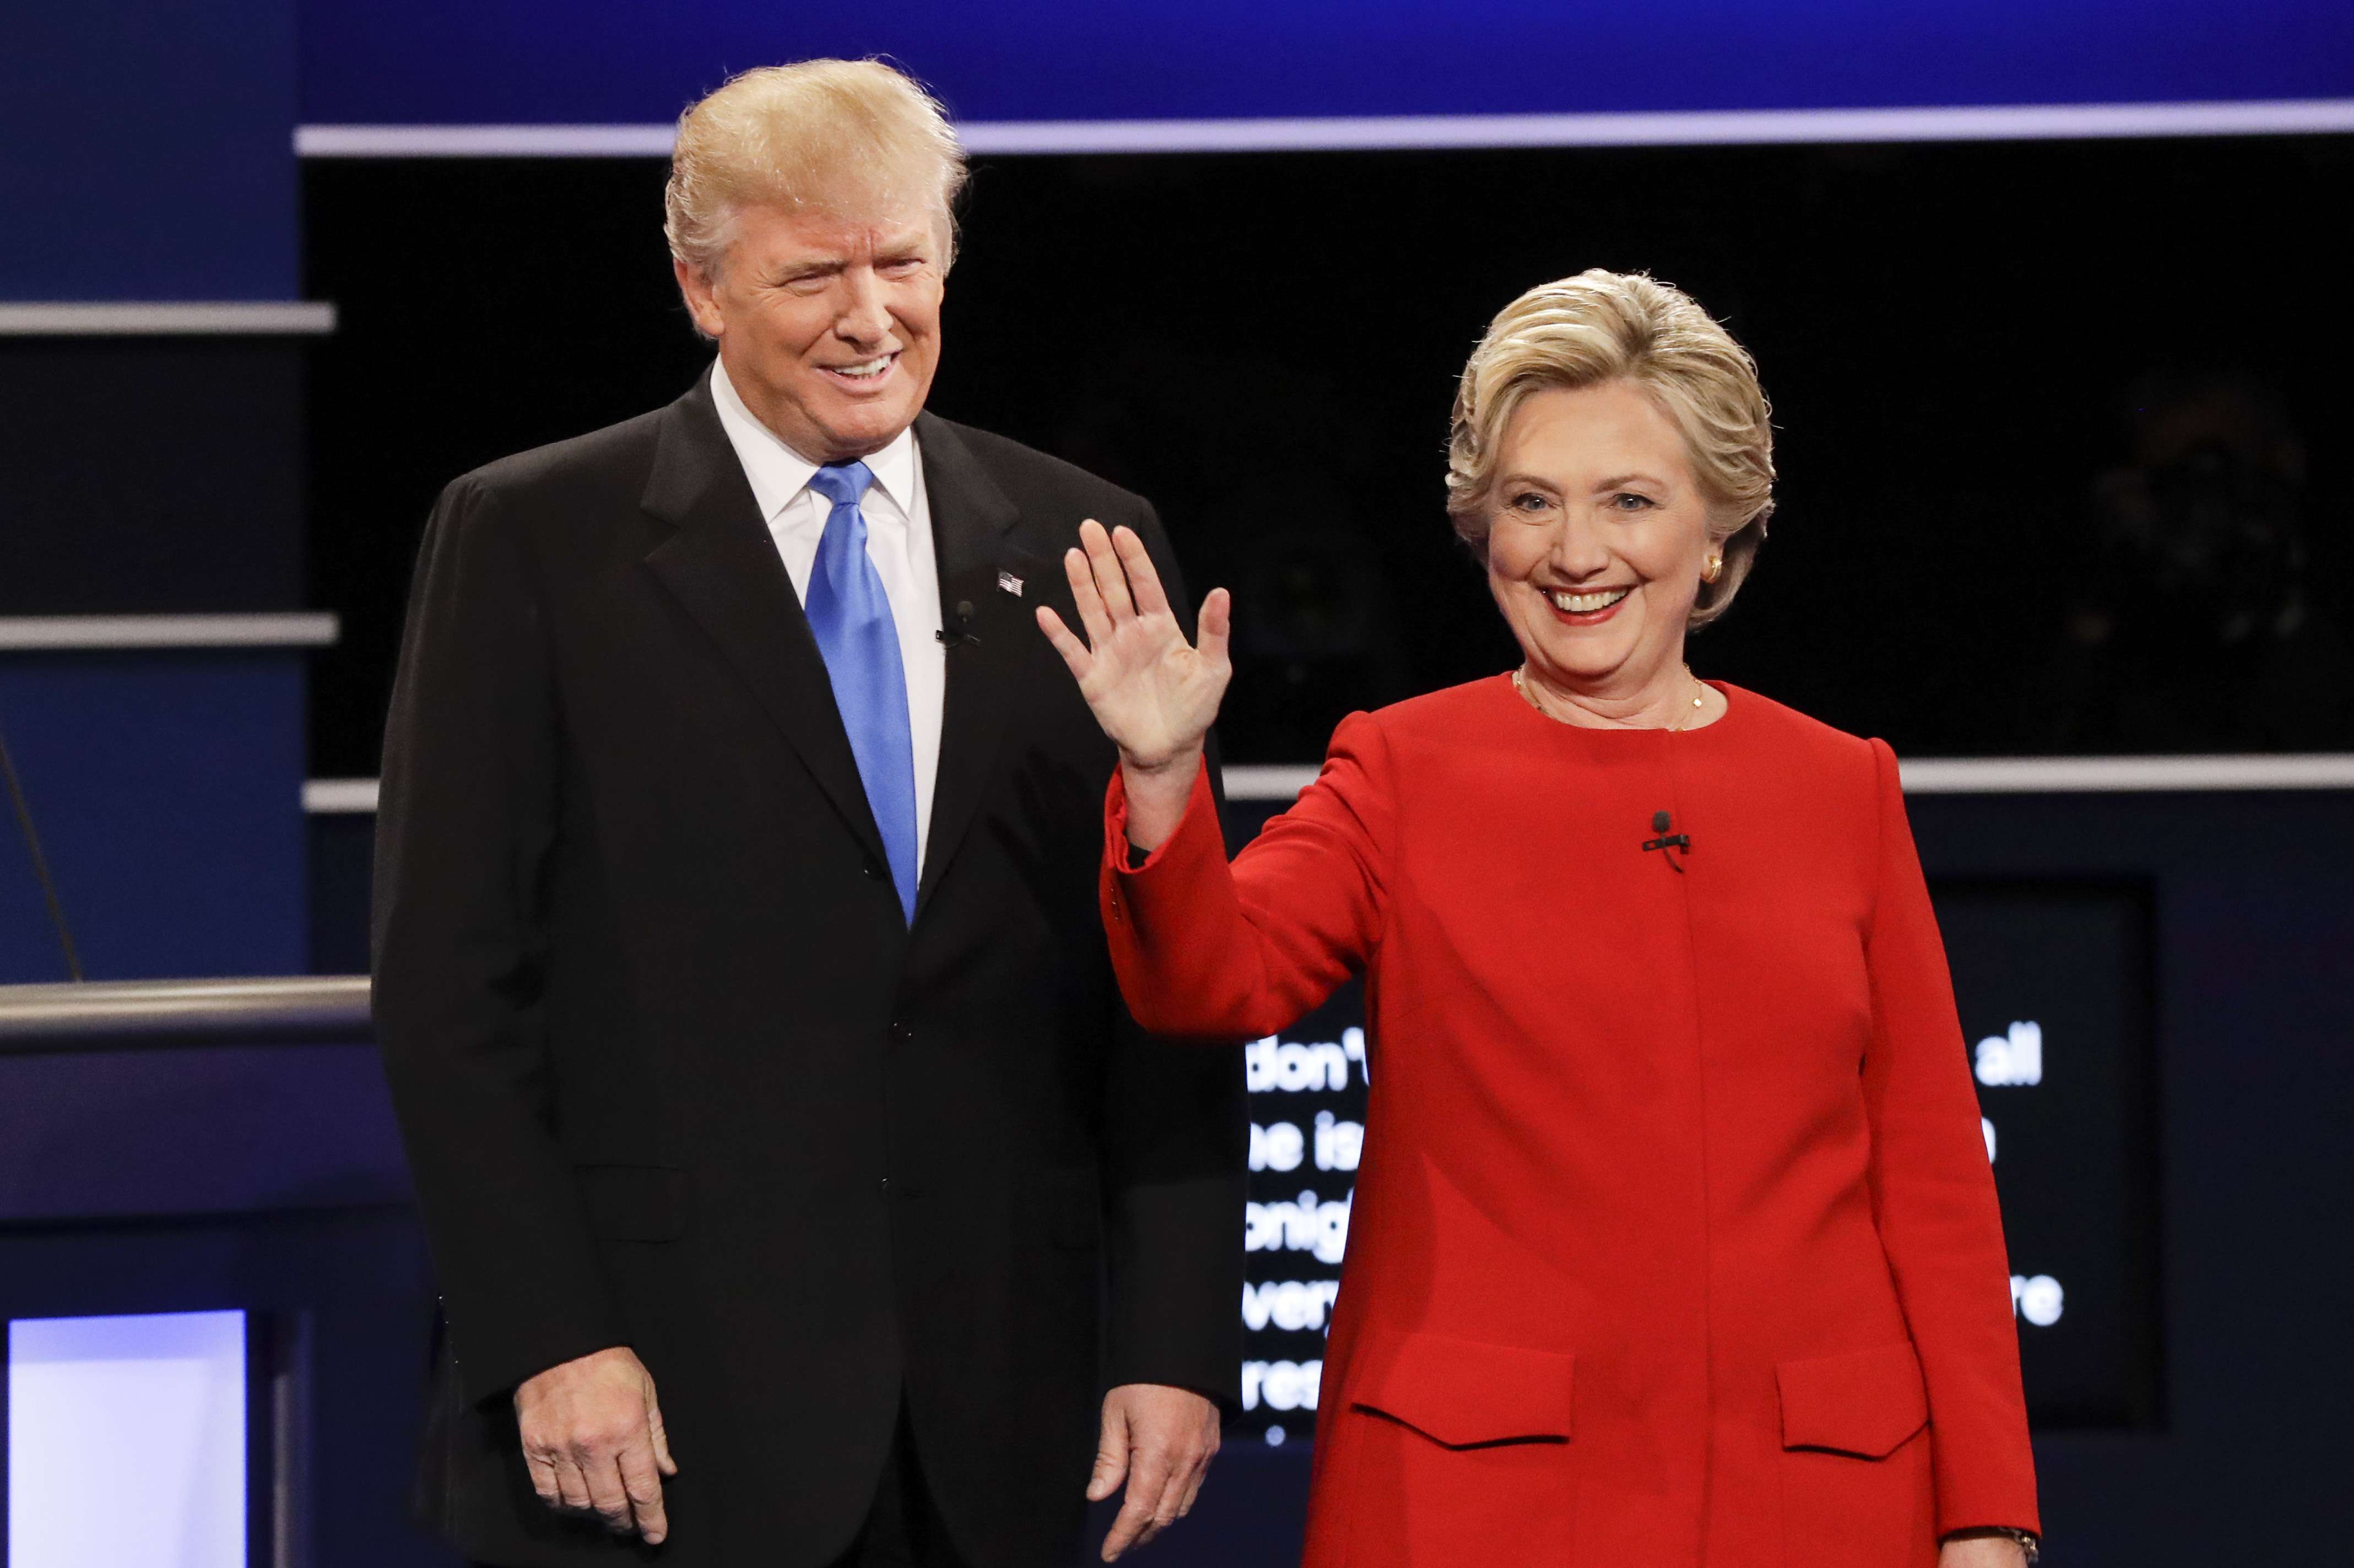 Donald Trump and Hillary Clinton ahead of their first presidential debate in New York on September 26. Photo: AP